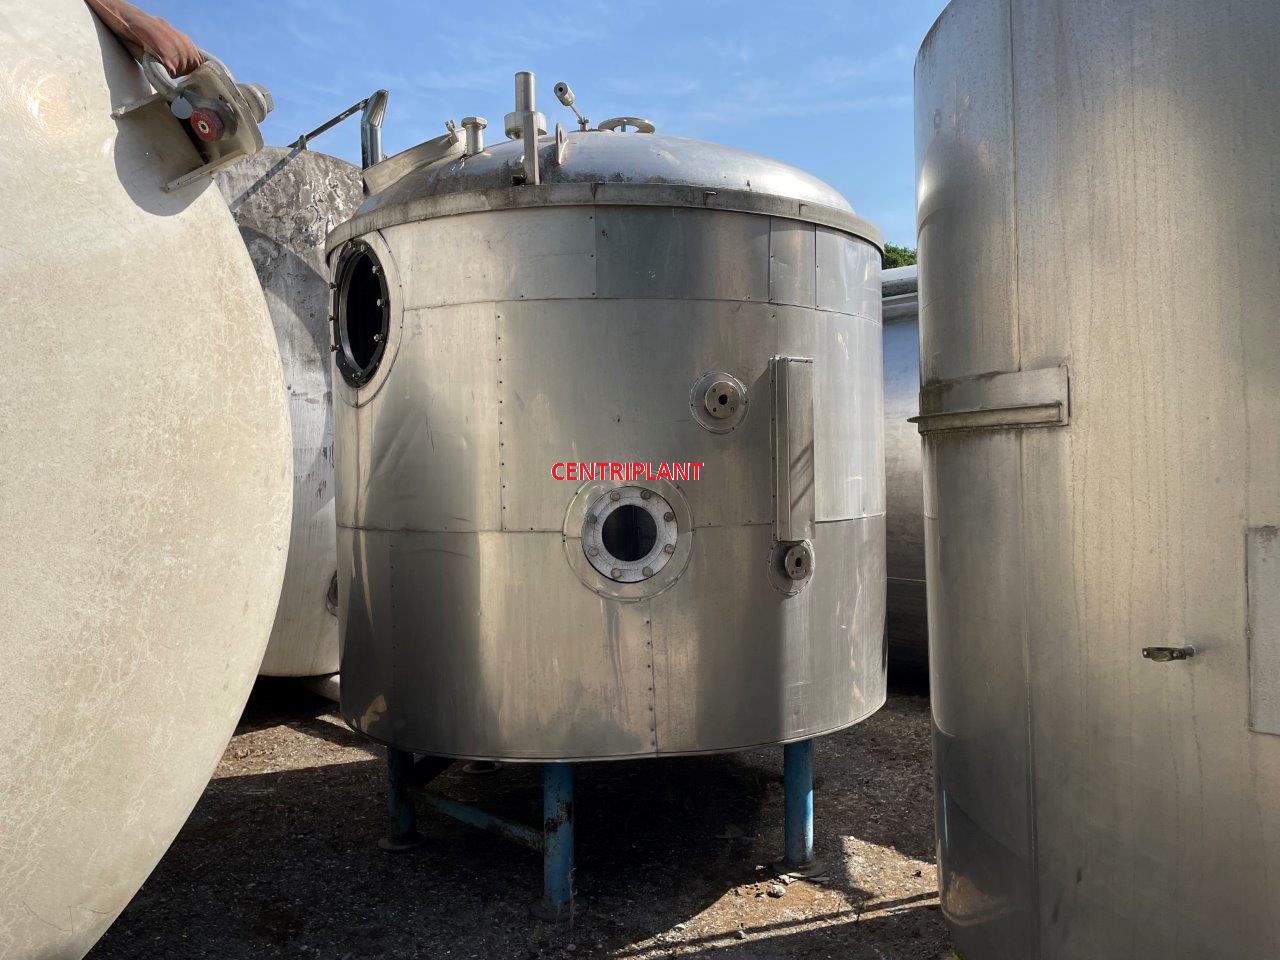 13460 - 9,500 LITRE STAINLESS STEEL TANK, INSULATED AND CLAD WITH STAINLESS STEEL